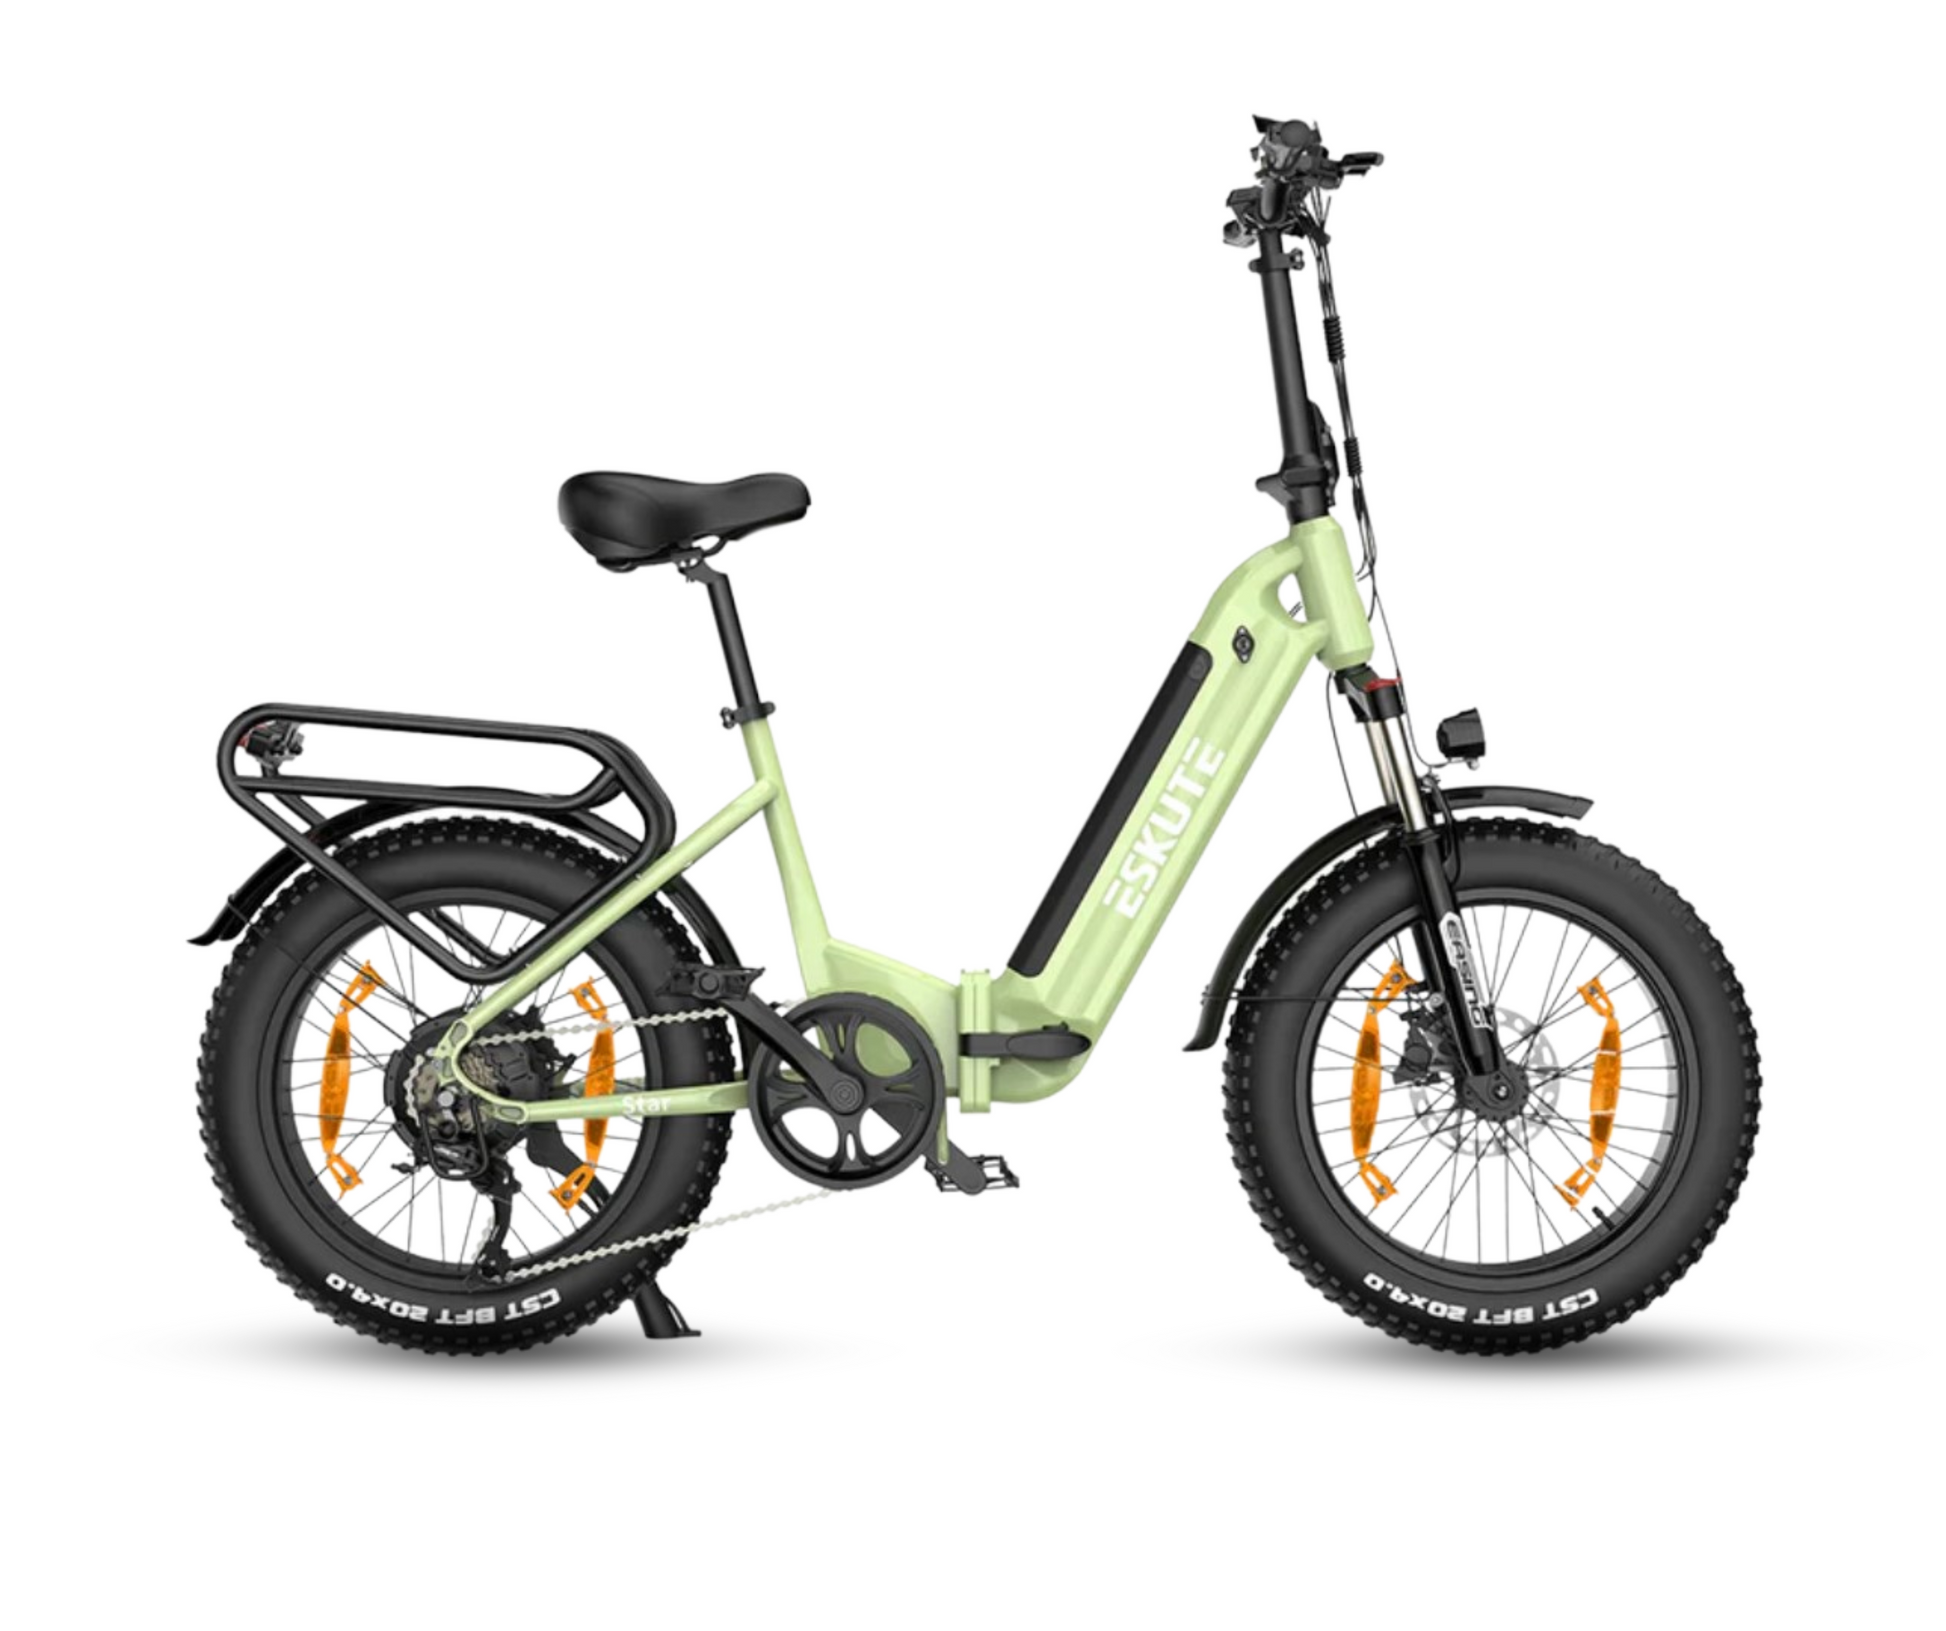 Eskute Star eBike in pastel green with fat tires for urban commuting.